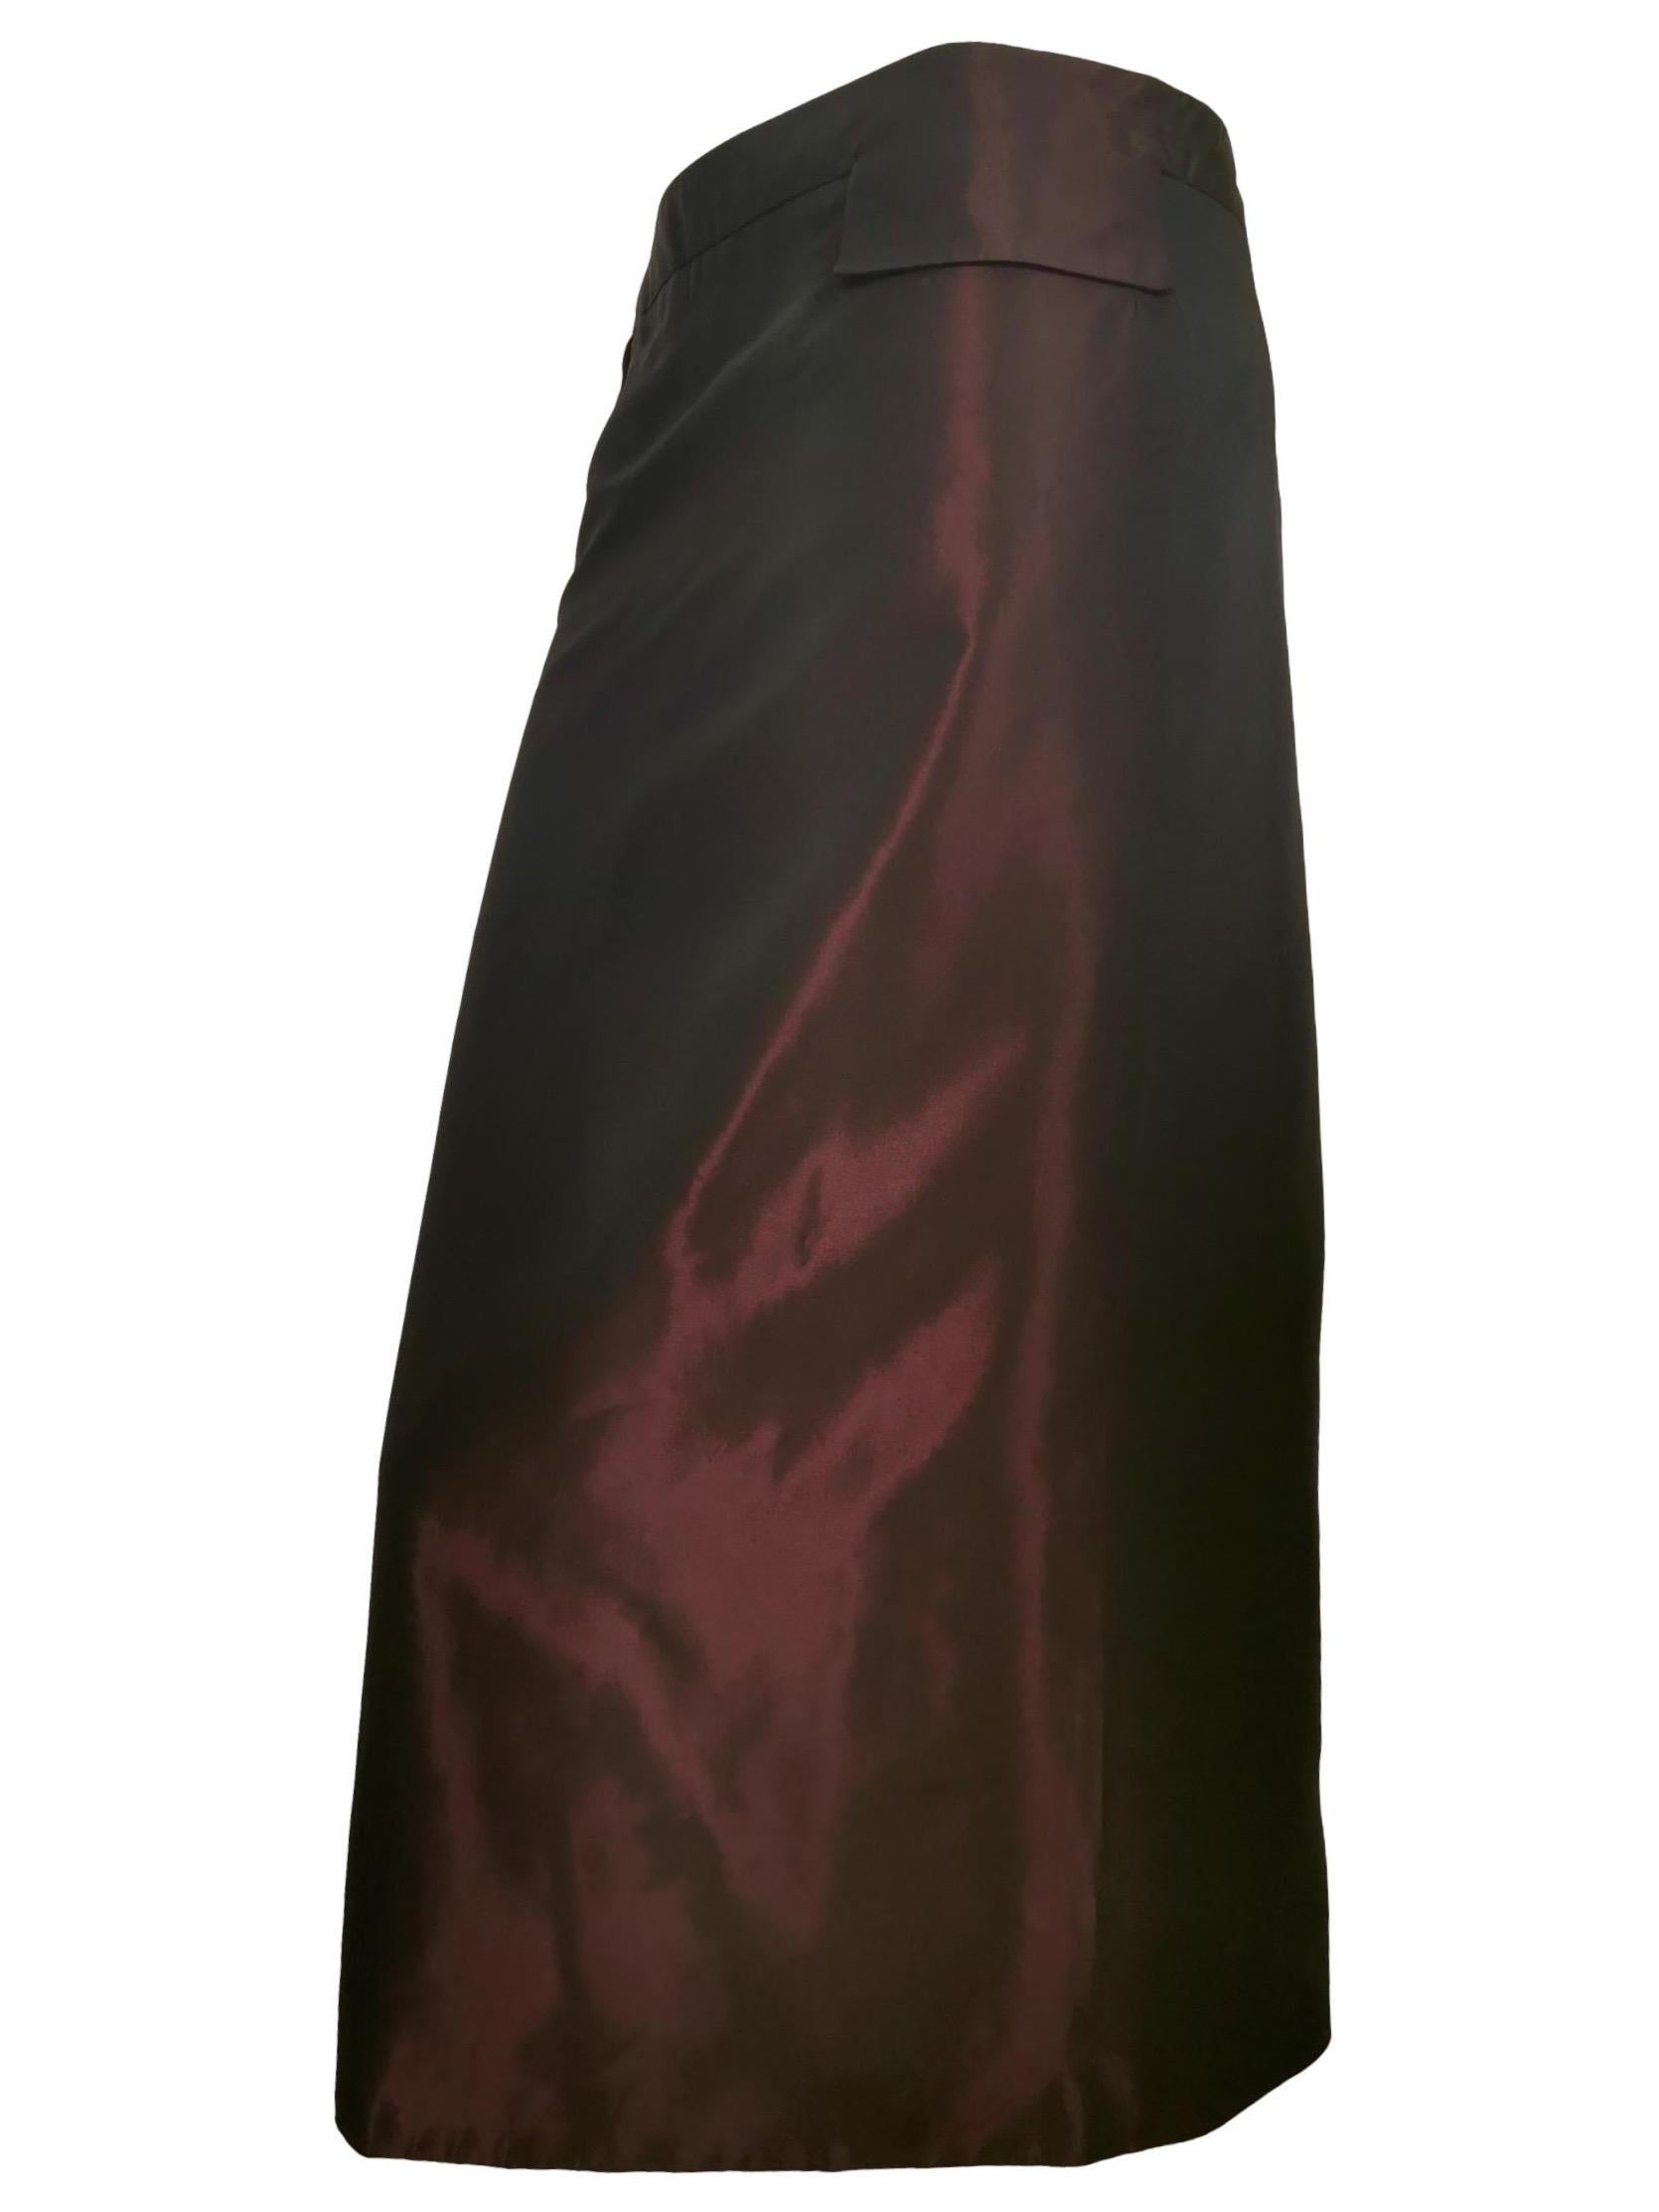 Alexander McQueen
Two Tone Shot Fabric
Fitted Skirt with Back Kick Pleat
Size 42 
30 Inch Waist